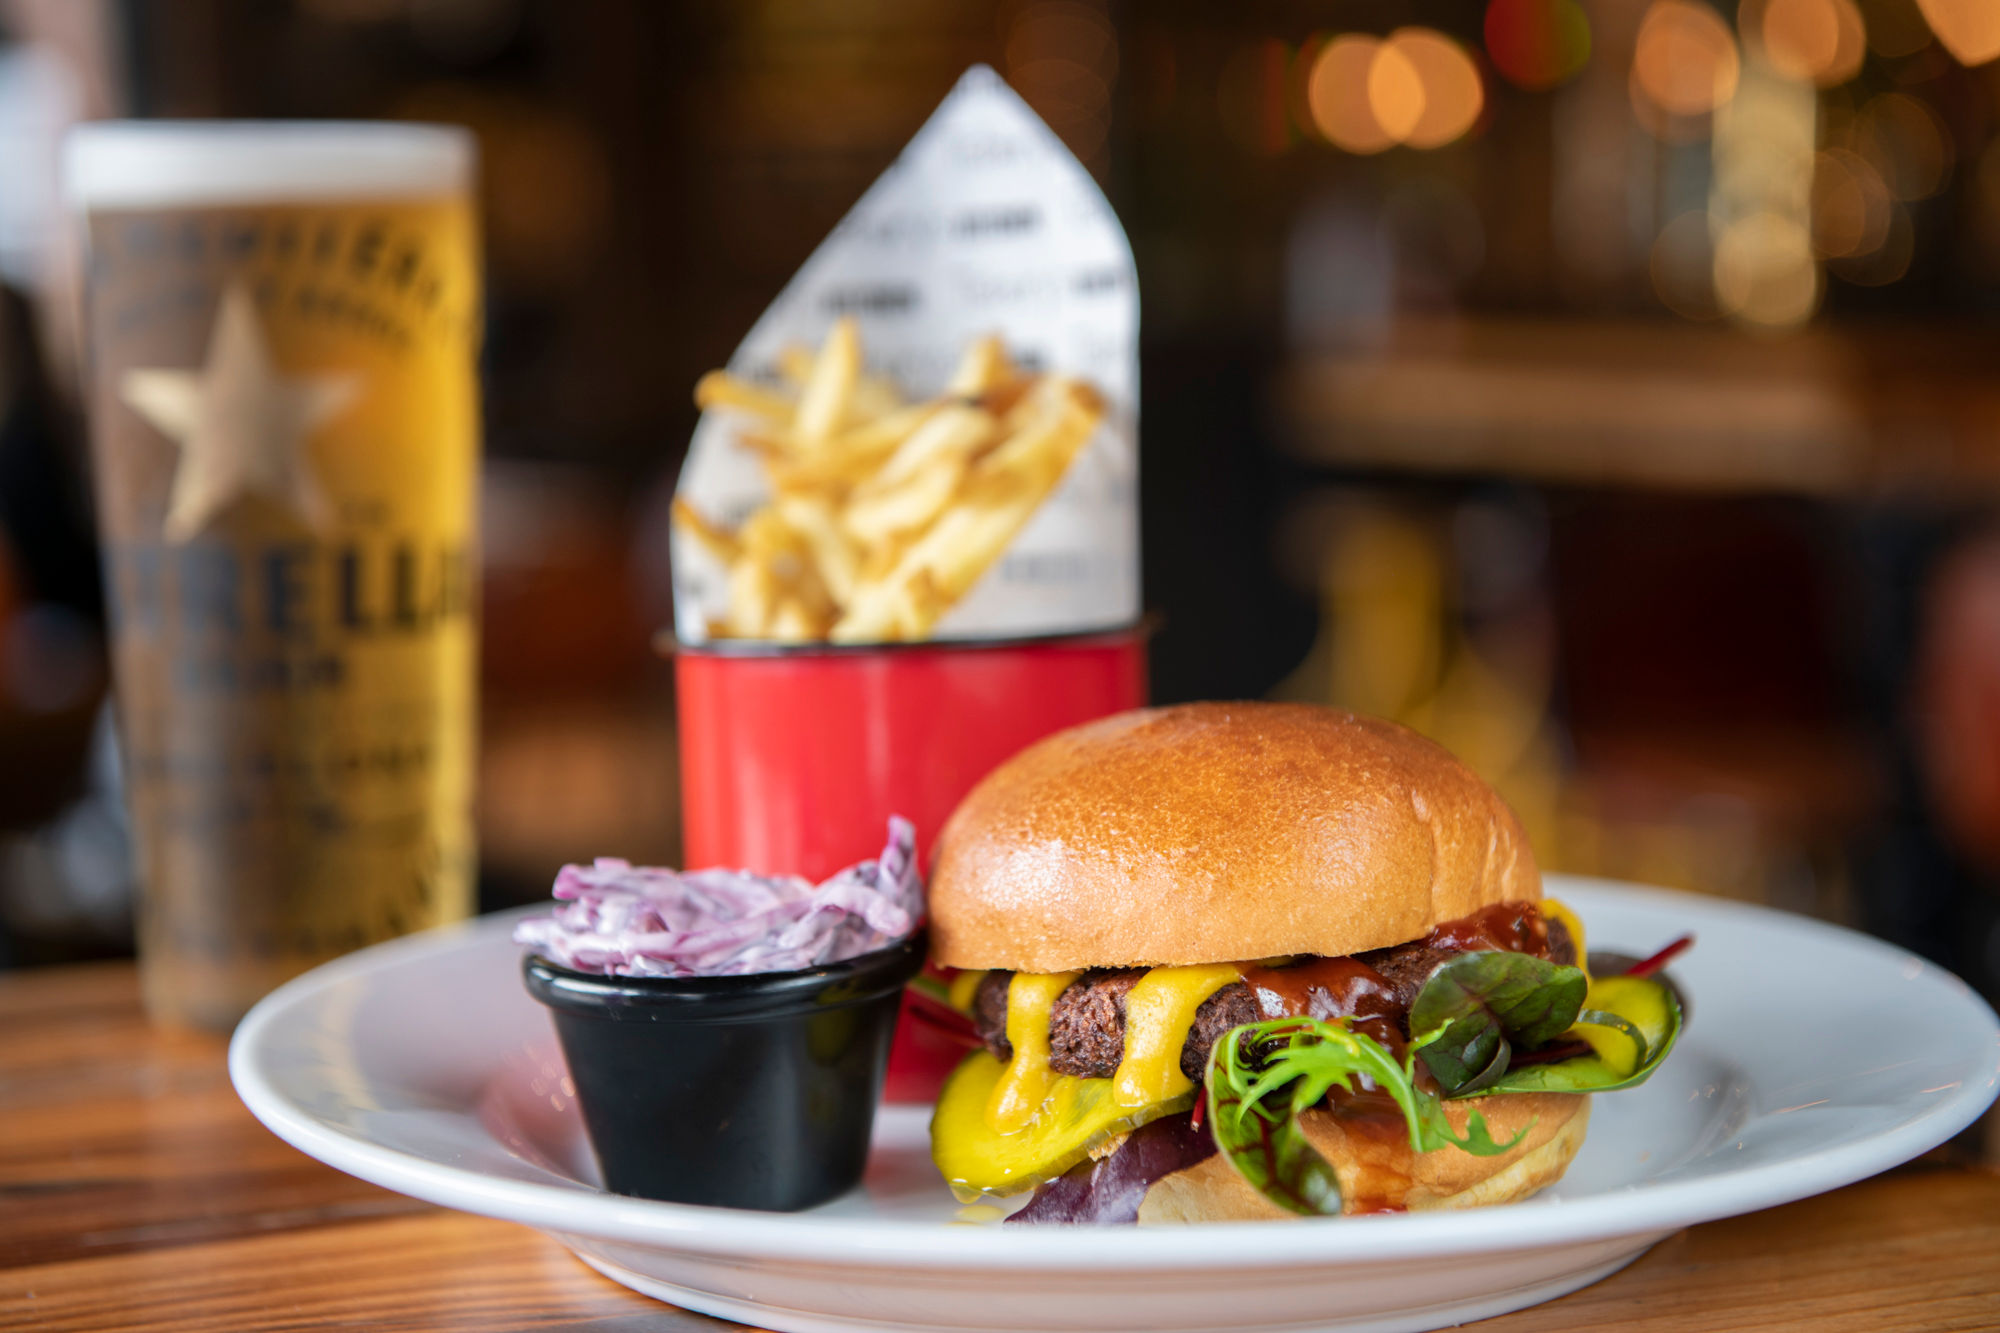 A cheeseburger with salad, a small pot of slaw and a cup of fries served on a white plate alongside a pint of beer.